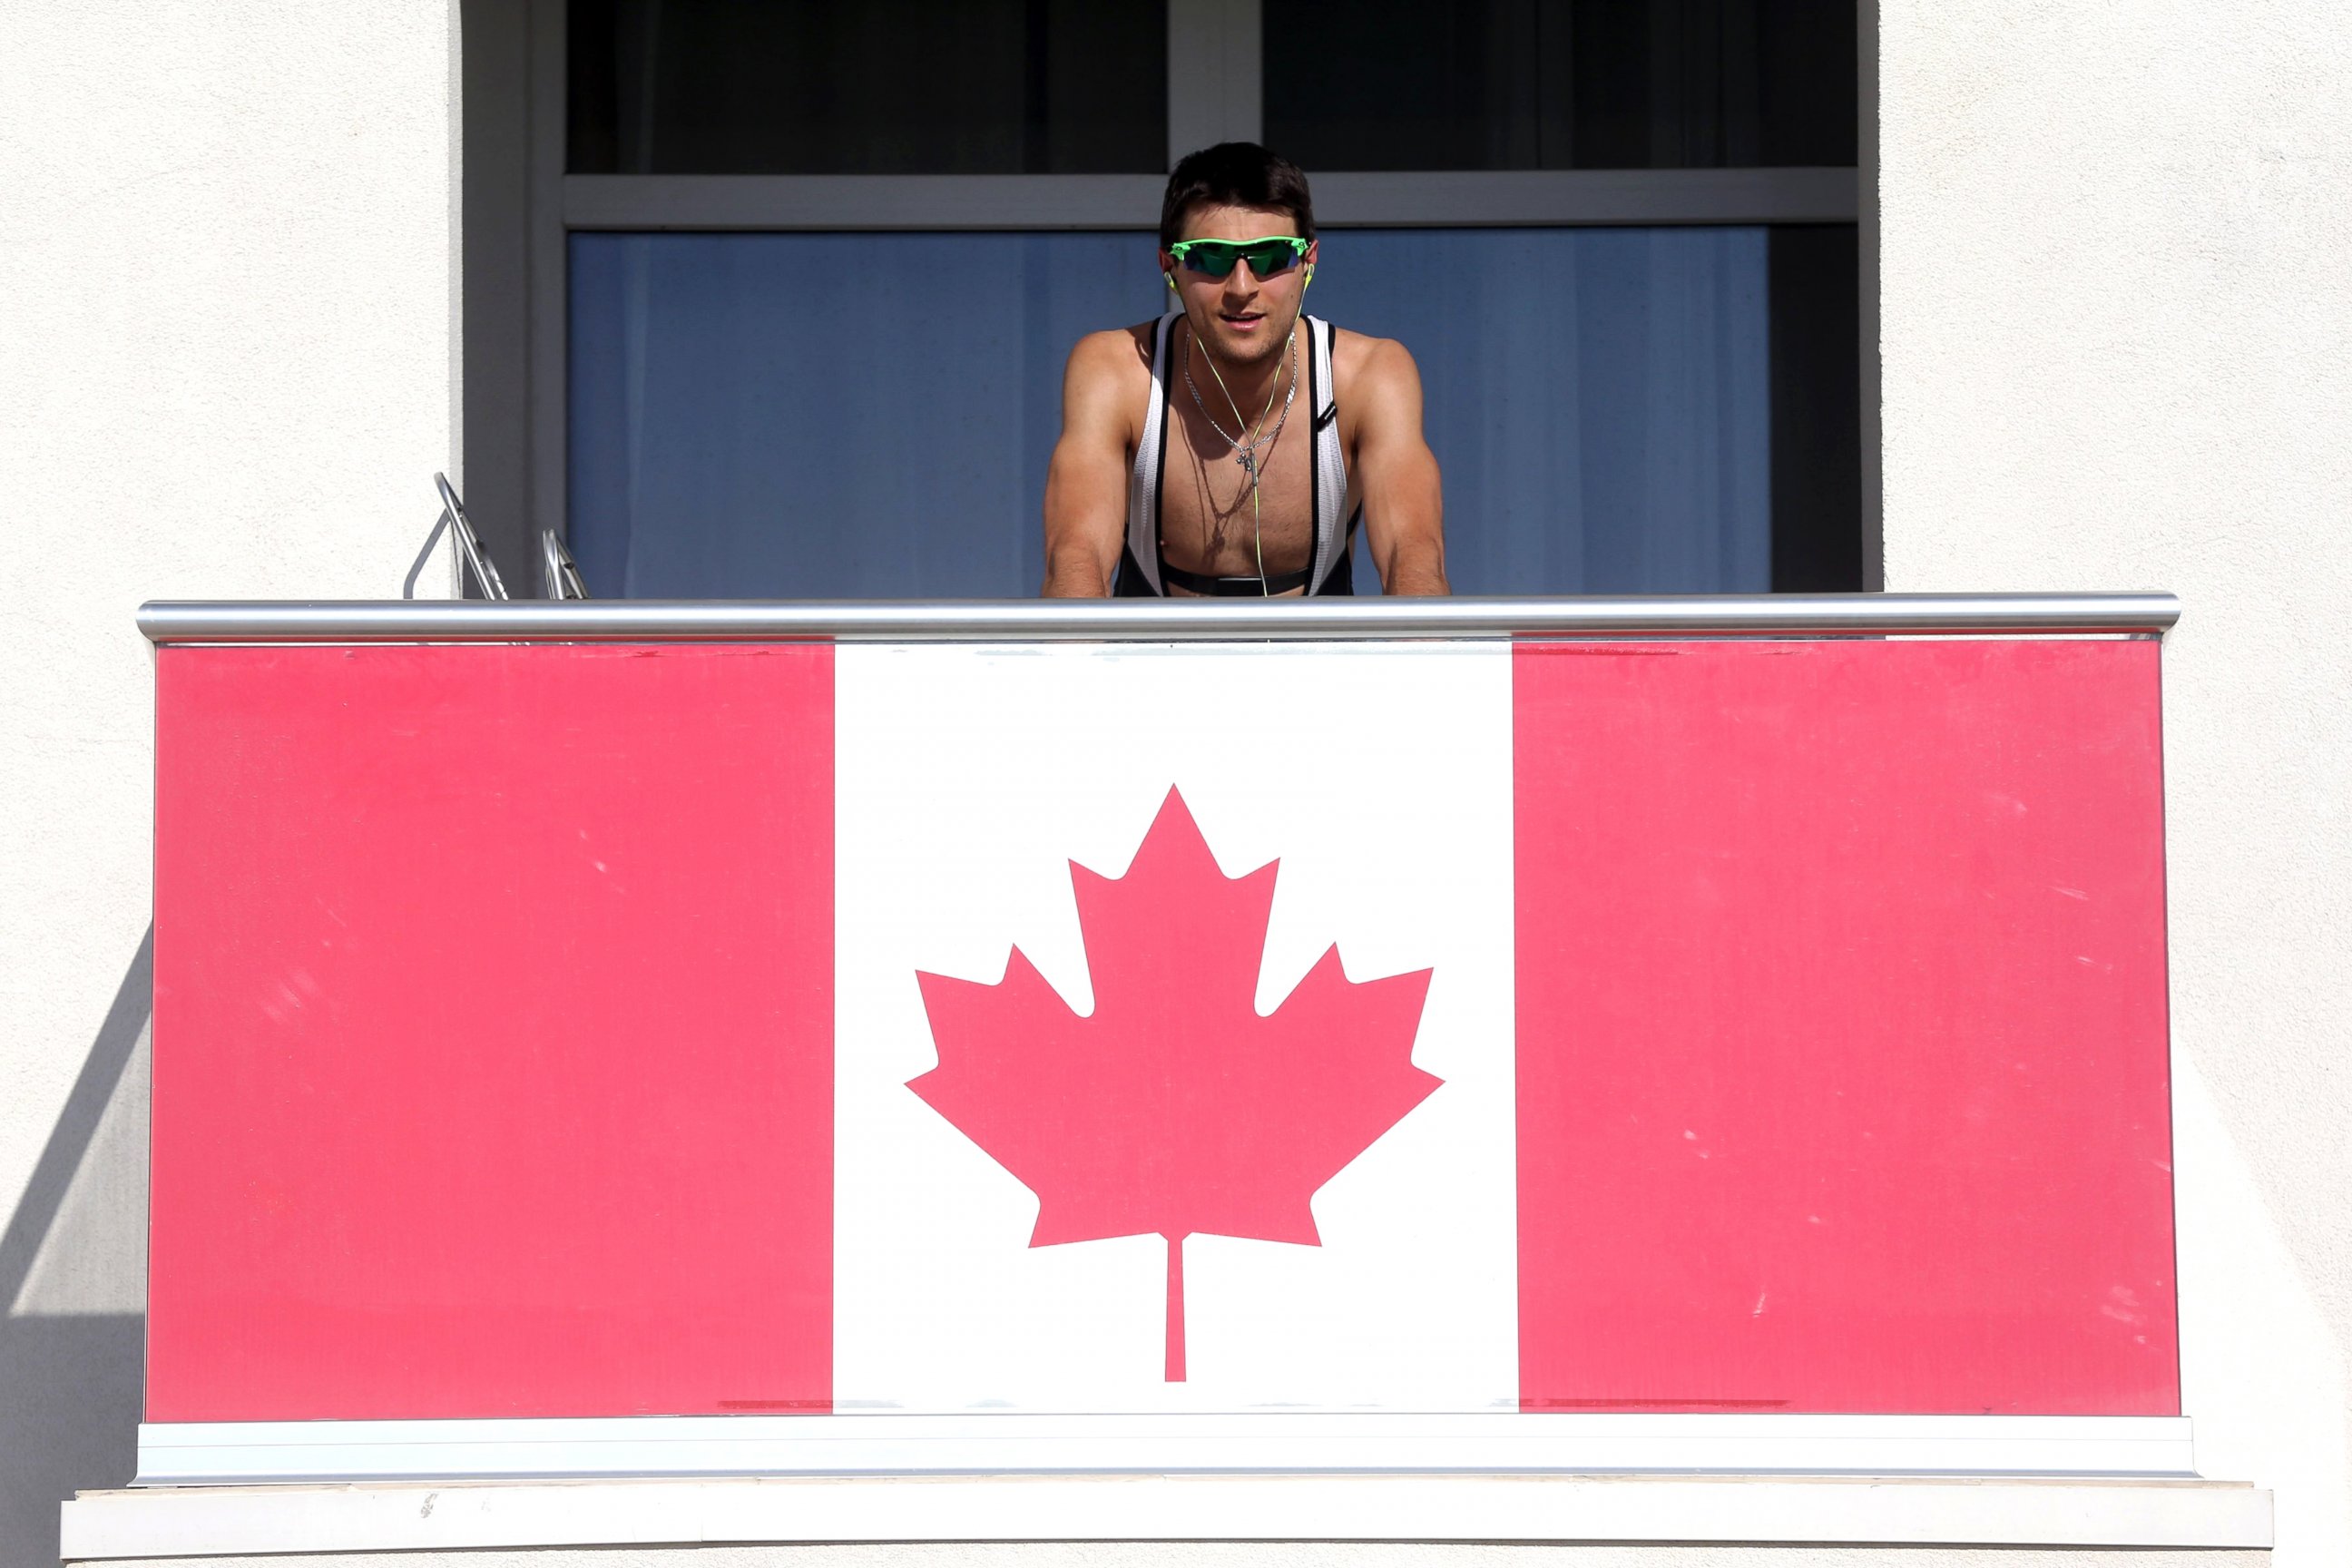 PHOTO: A member of the Canadian team takes advantage of warm weather to work out on his balcony in Olympic Village at the Winter Olympics in Sochi, Russia, Feb. 6, 2014.